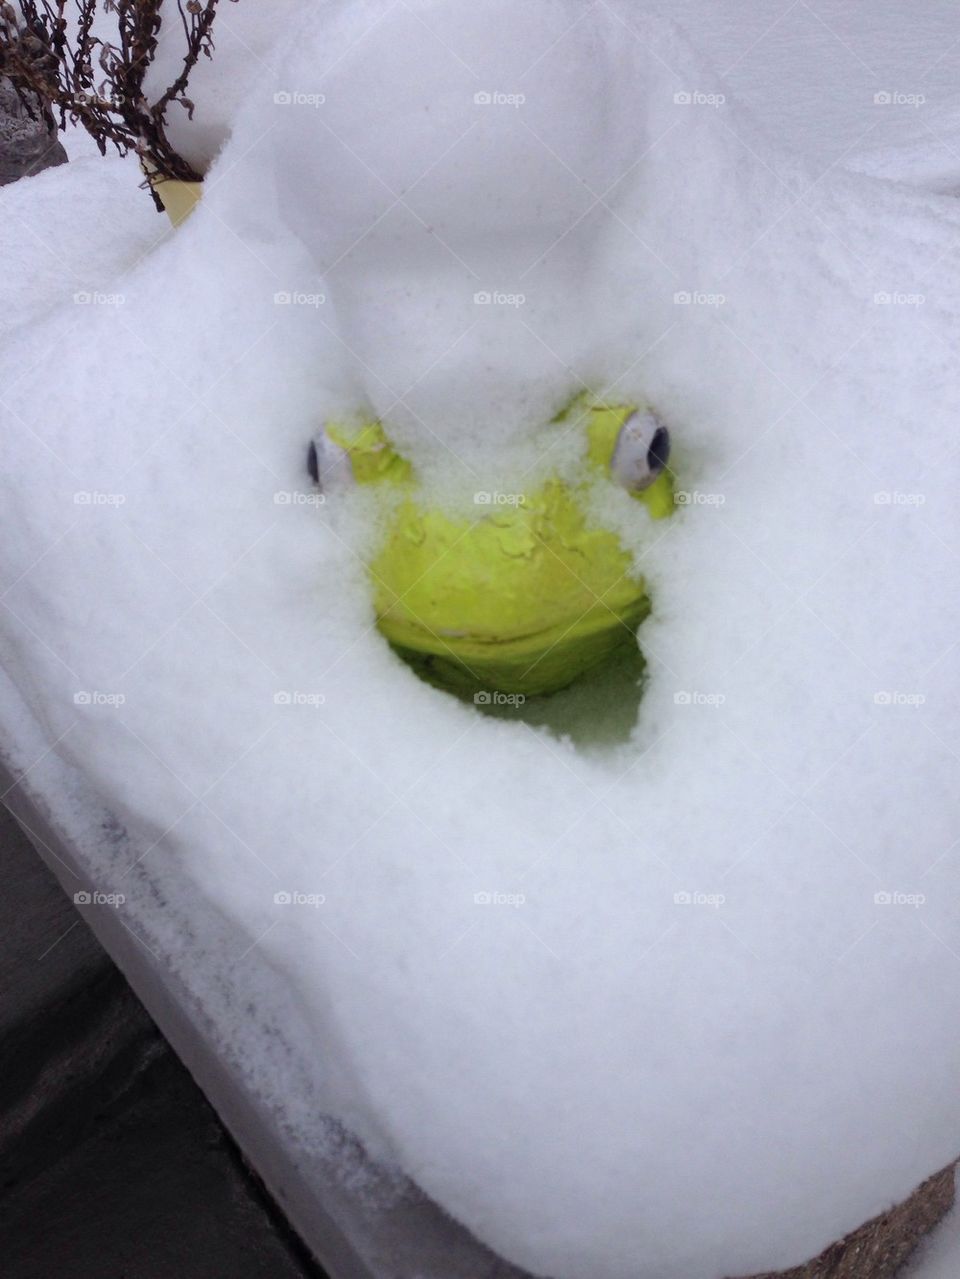 Snowfrog. Just a cute pic
